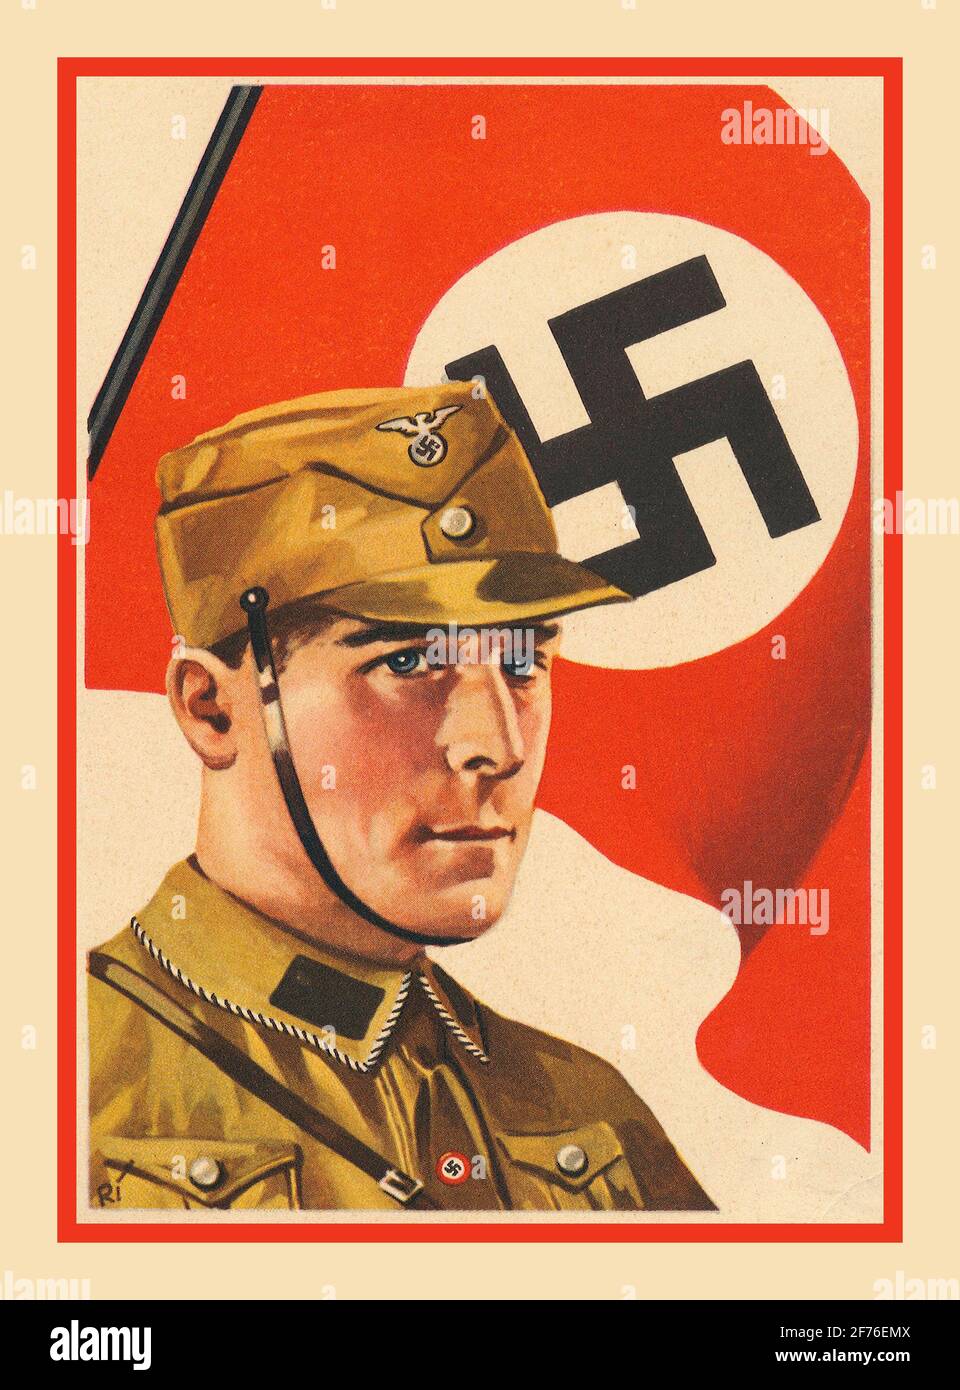 Vintage Nazi Propaganda Poster Card 1930's 'SA man in uniform portrait in front of a swastika flag',  SA, abbreviation of Sturmabteilung (German: “Assault Division”), byname Storm Troopers or Brownshirts, German Sturmtruppen or Braunhemden, in the German Nazi Party, a paramilitary organization whose methods of violent intimidation played a key role in Adolf Hitler’s rise to power in the 1930's Stock Photo